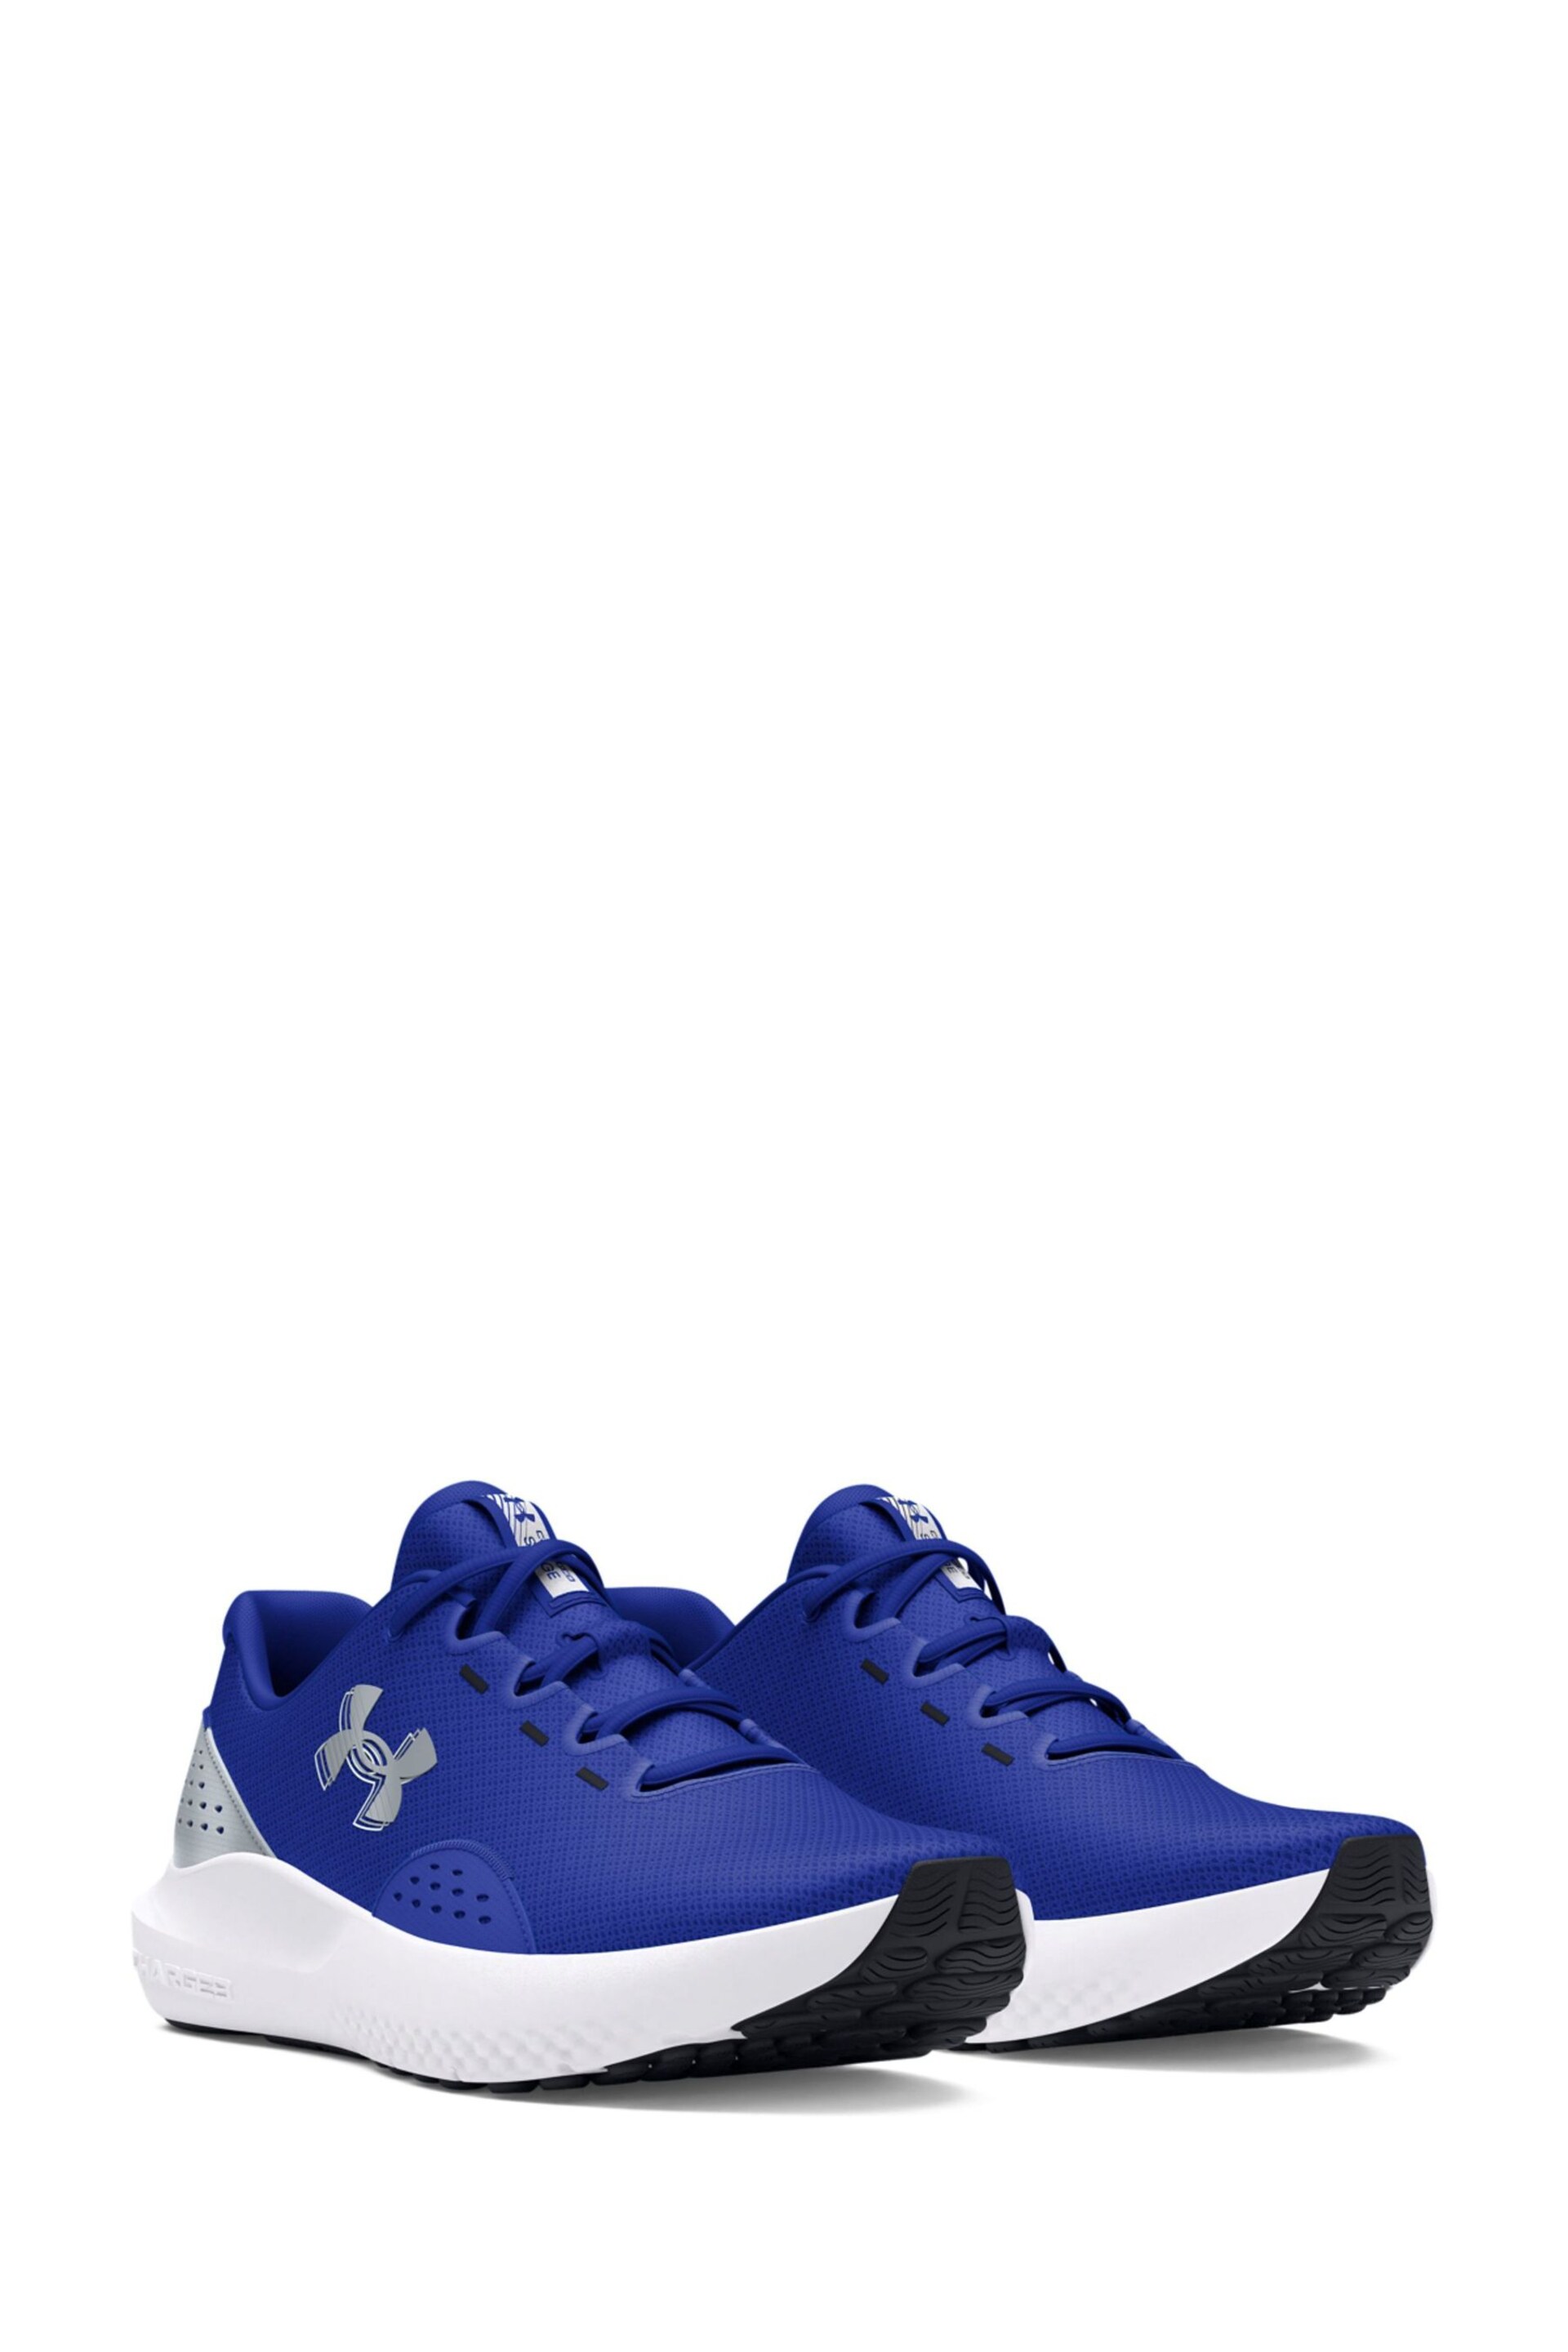 Under Armour Blue Surge 4 Trainers - Image 3 of 5